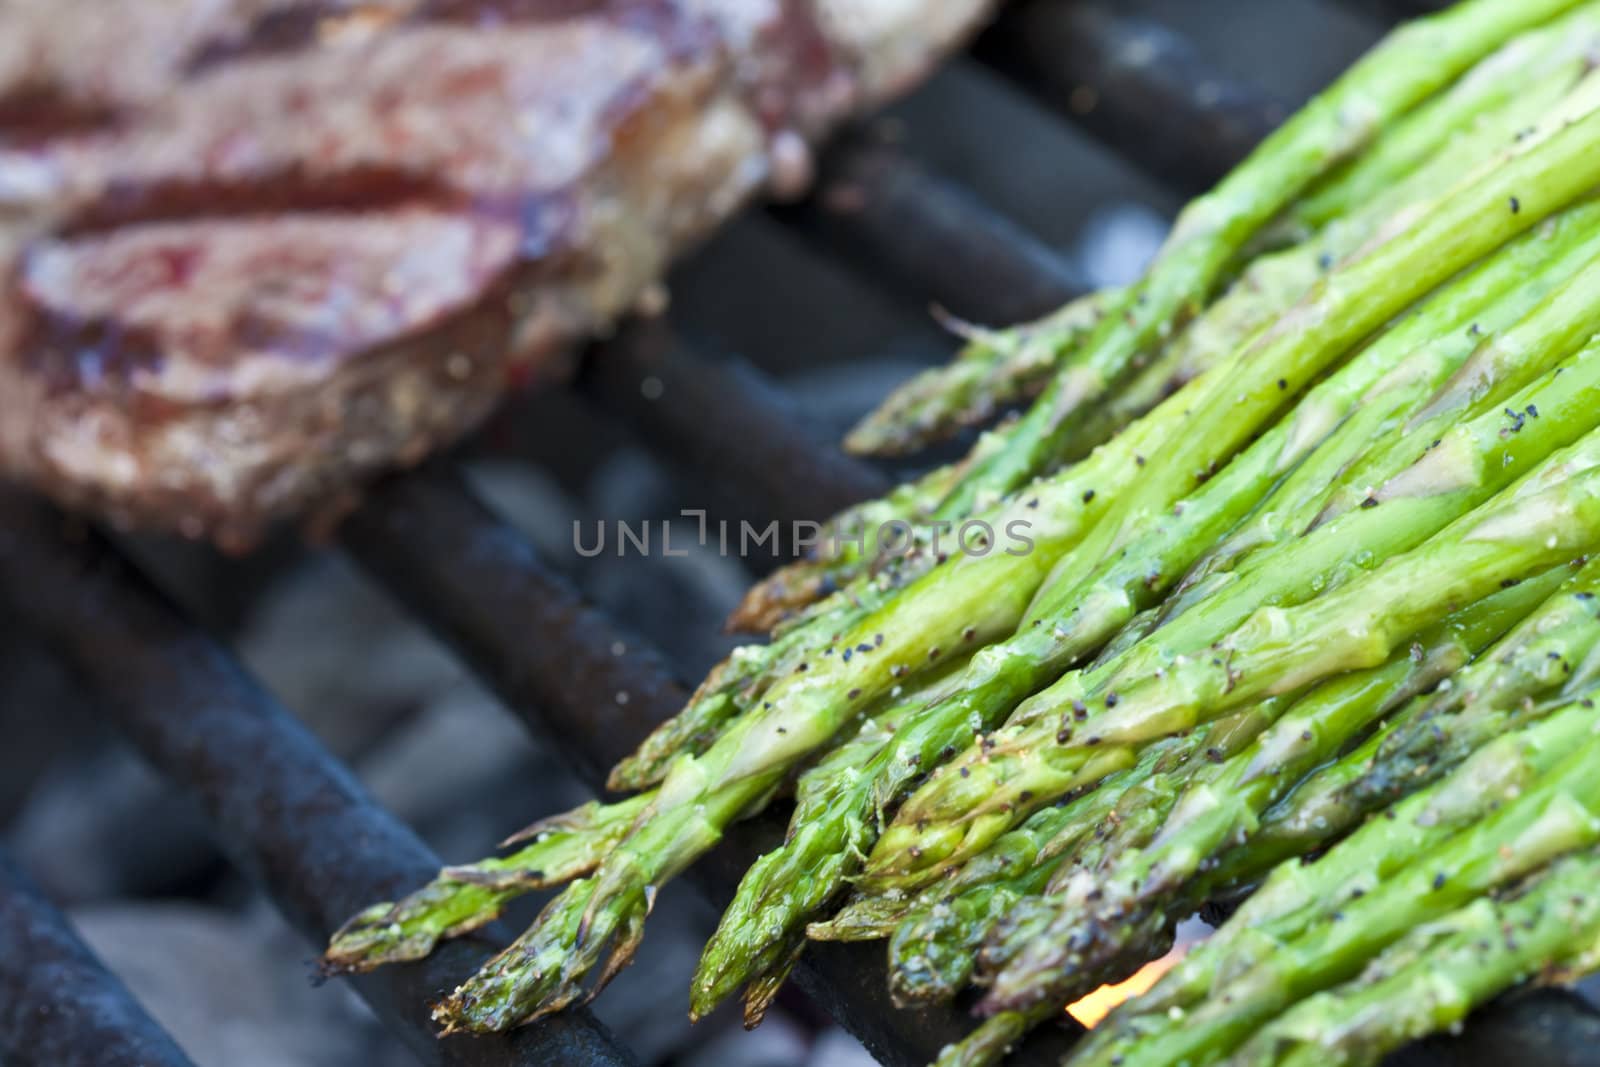 steak and asparagus on a charcoal grill short focus